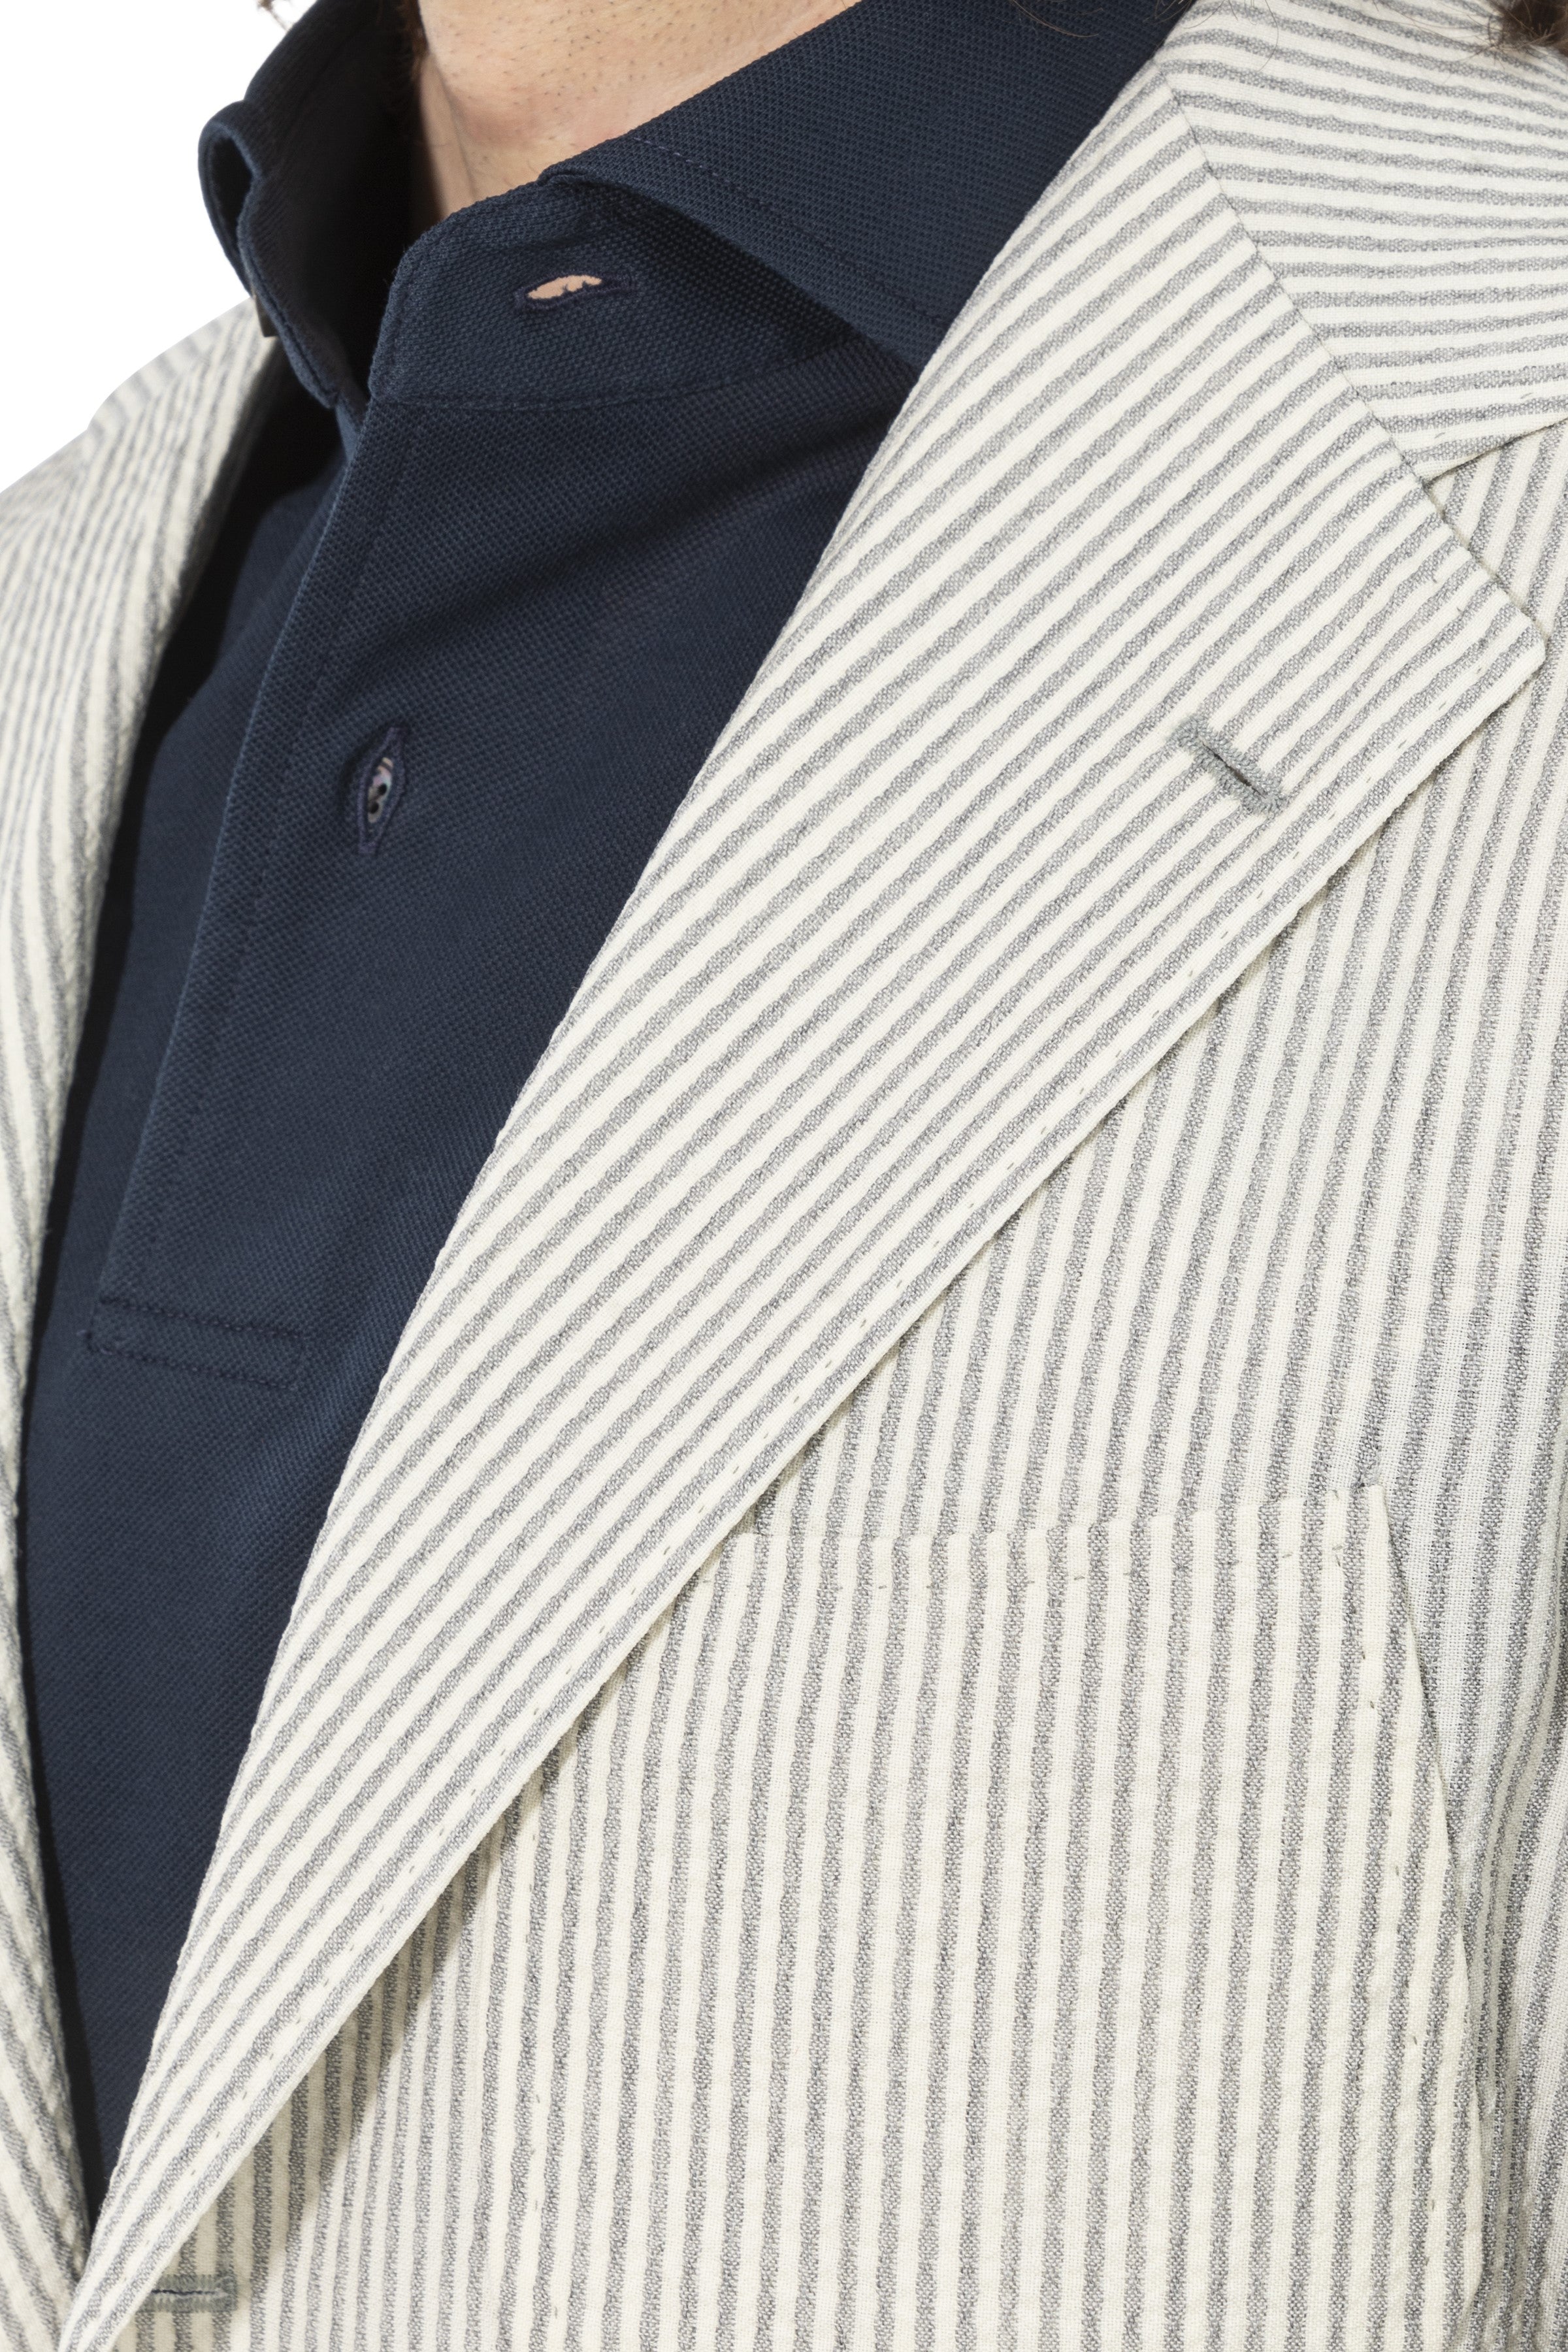 The Armoury by Ring Jacket Model 7A Grey-White Stripe Wool Seersucker Suit